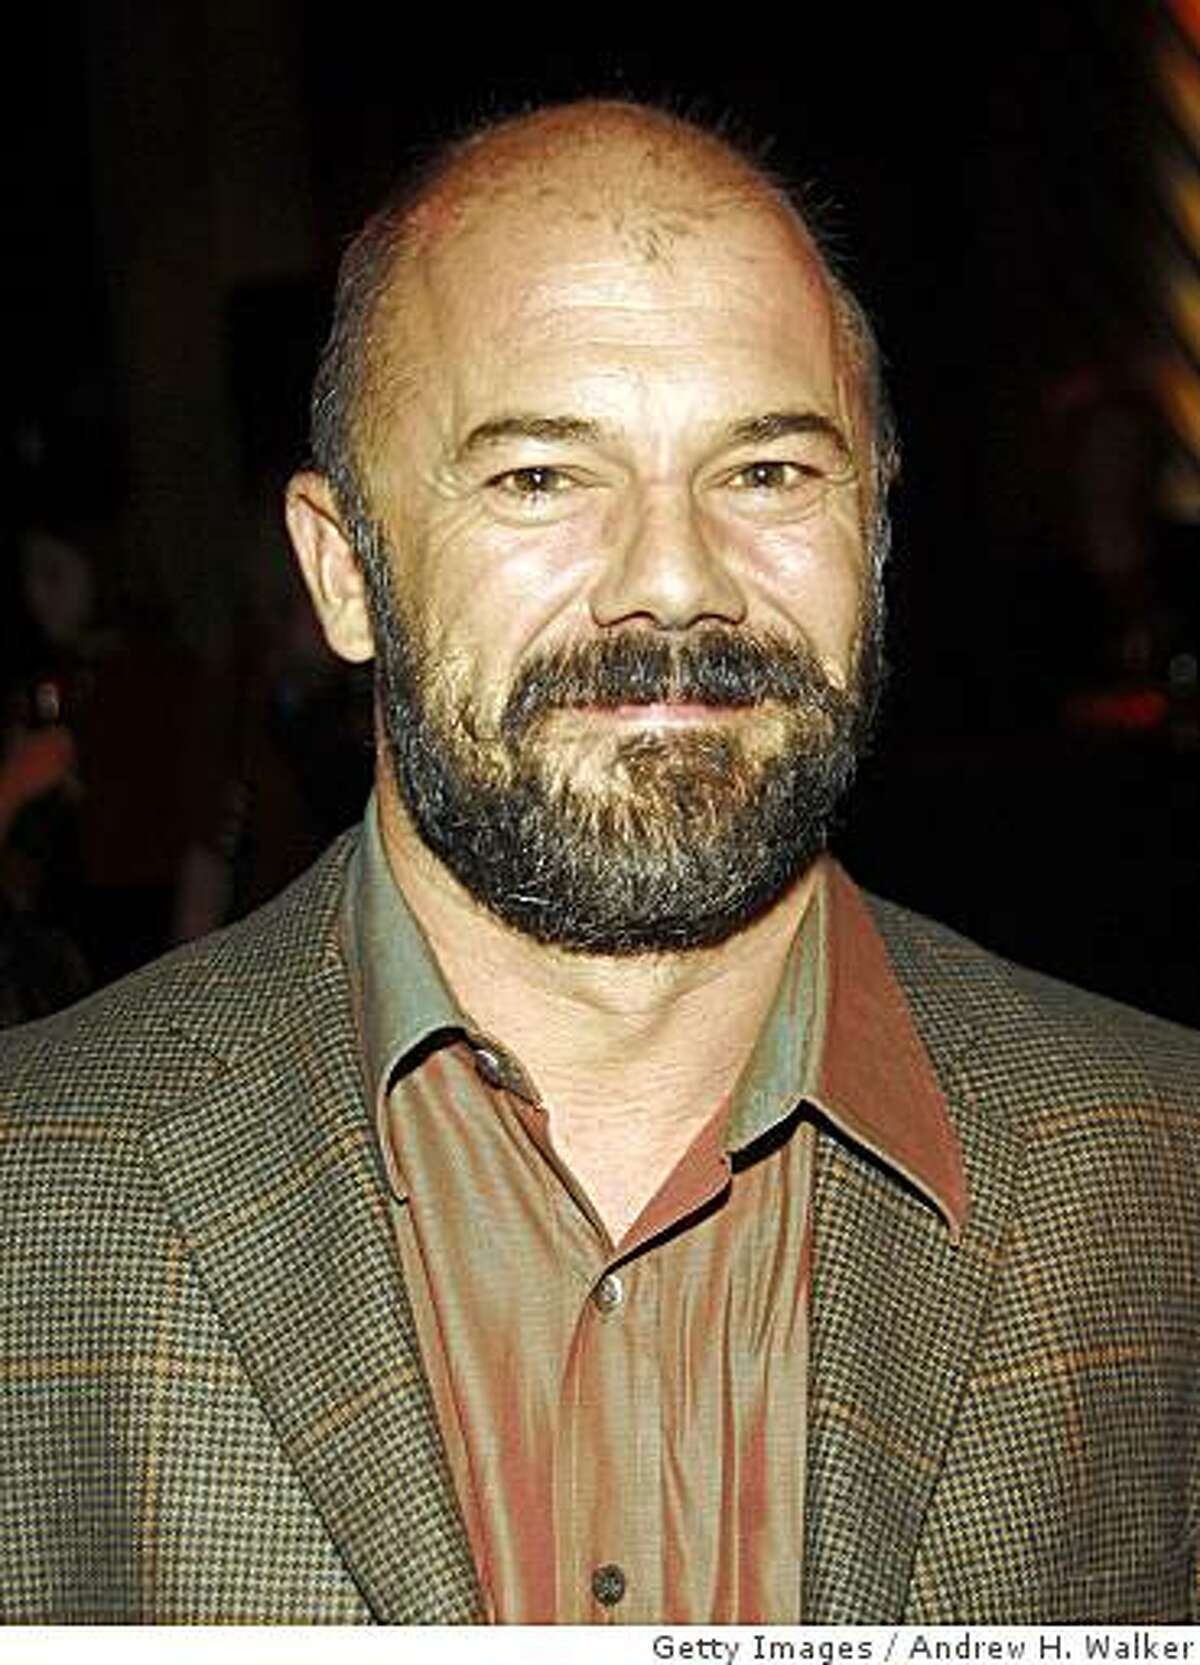 NEW YORK - NOVEMBER 8: Andrew Sullivan attends The Atlantic Magazine's 150th Anniversary celebration on November 8, 2007 in New York City. (Photo by Andrew H. Walker/Getty Images)